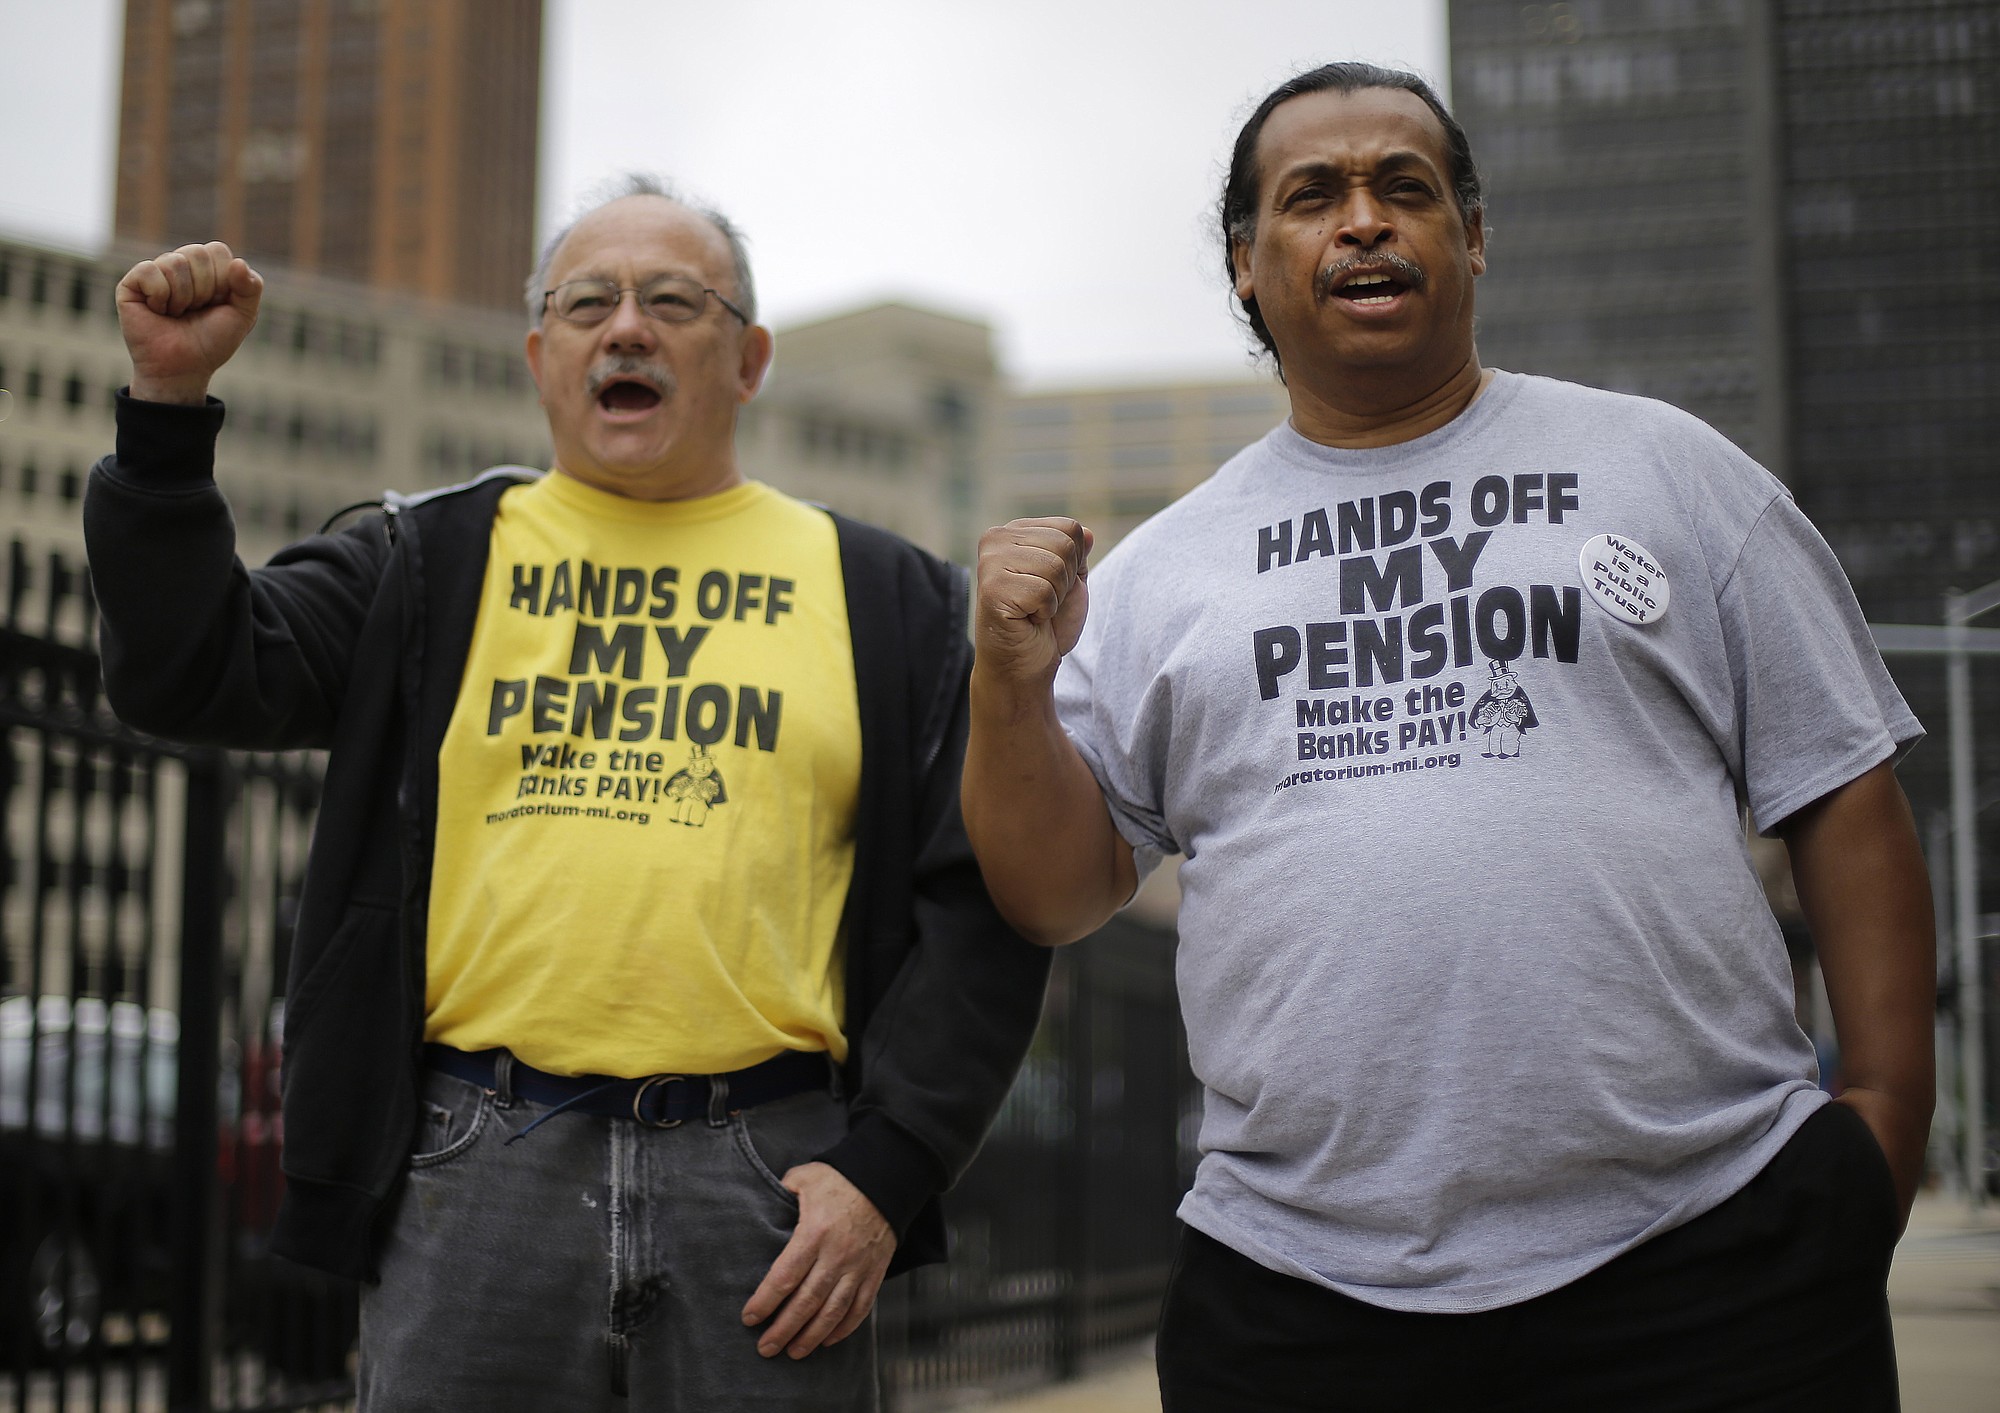 Detroit retirees Mike Shane, left, and William Davis protest near the federal courthouse in Detroit.